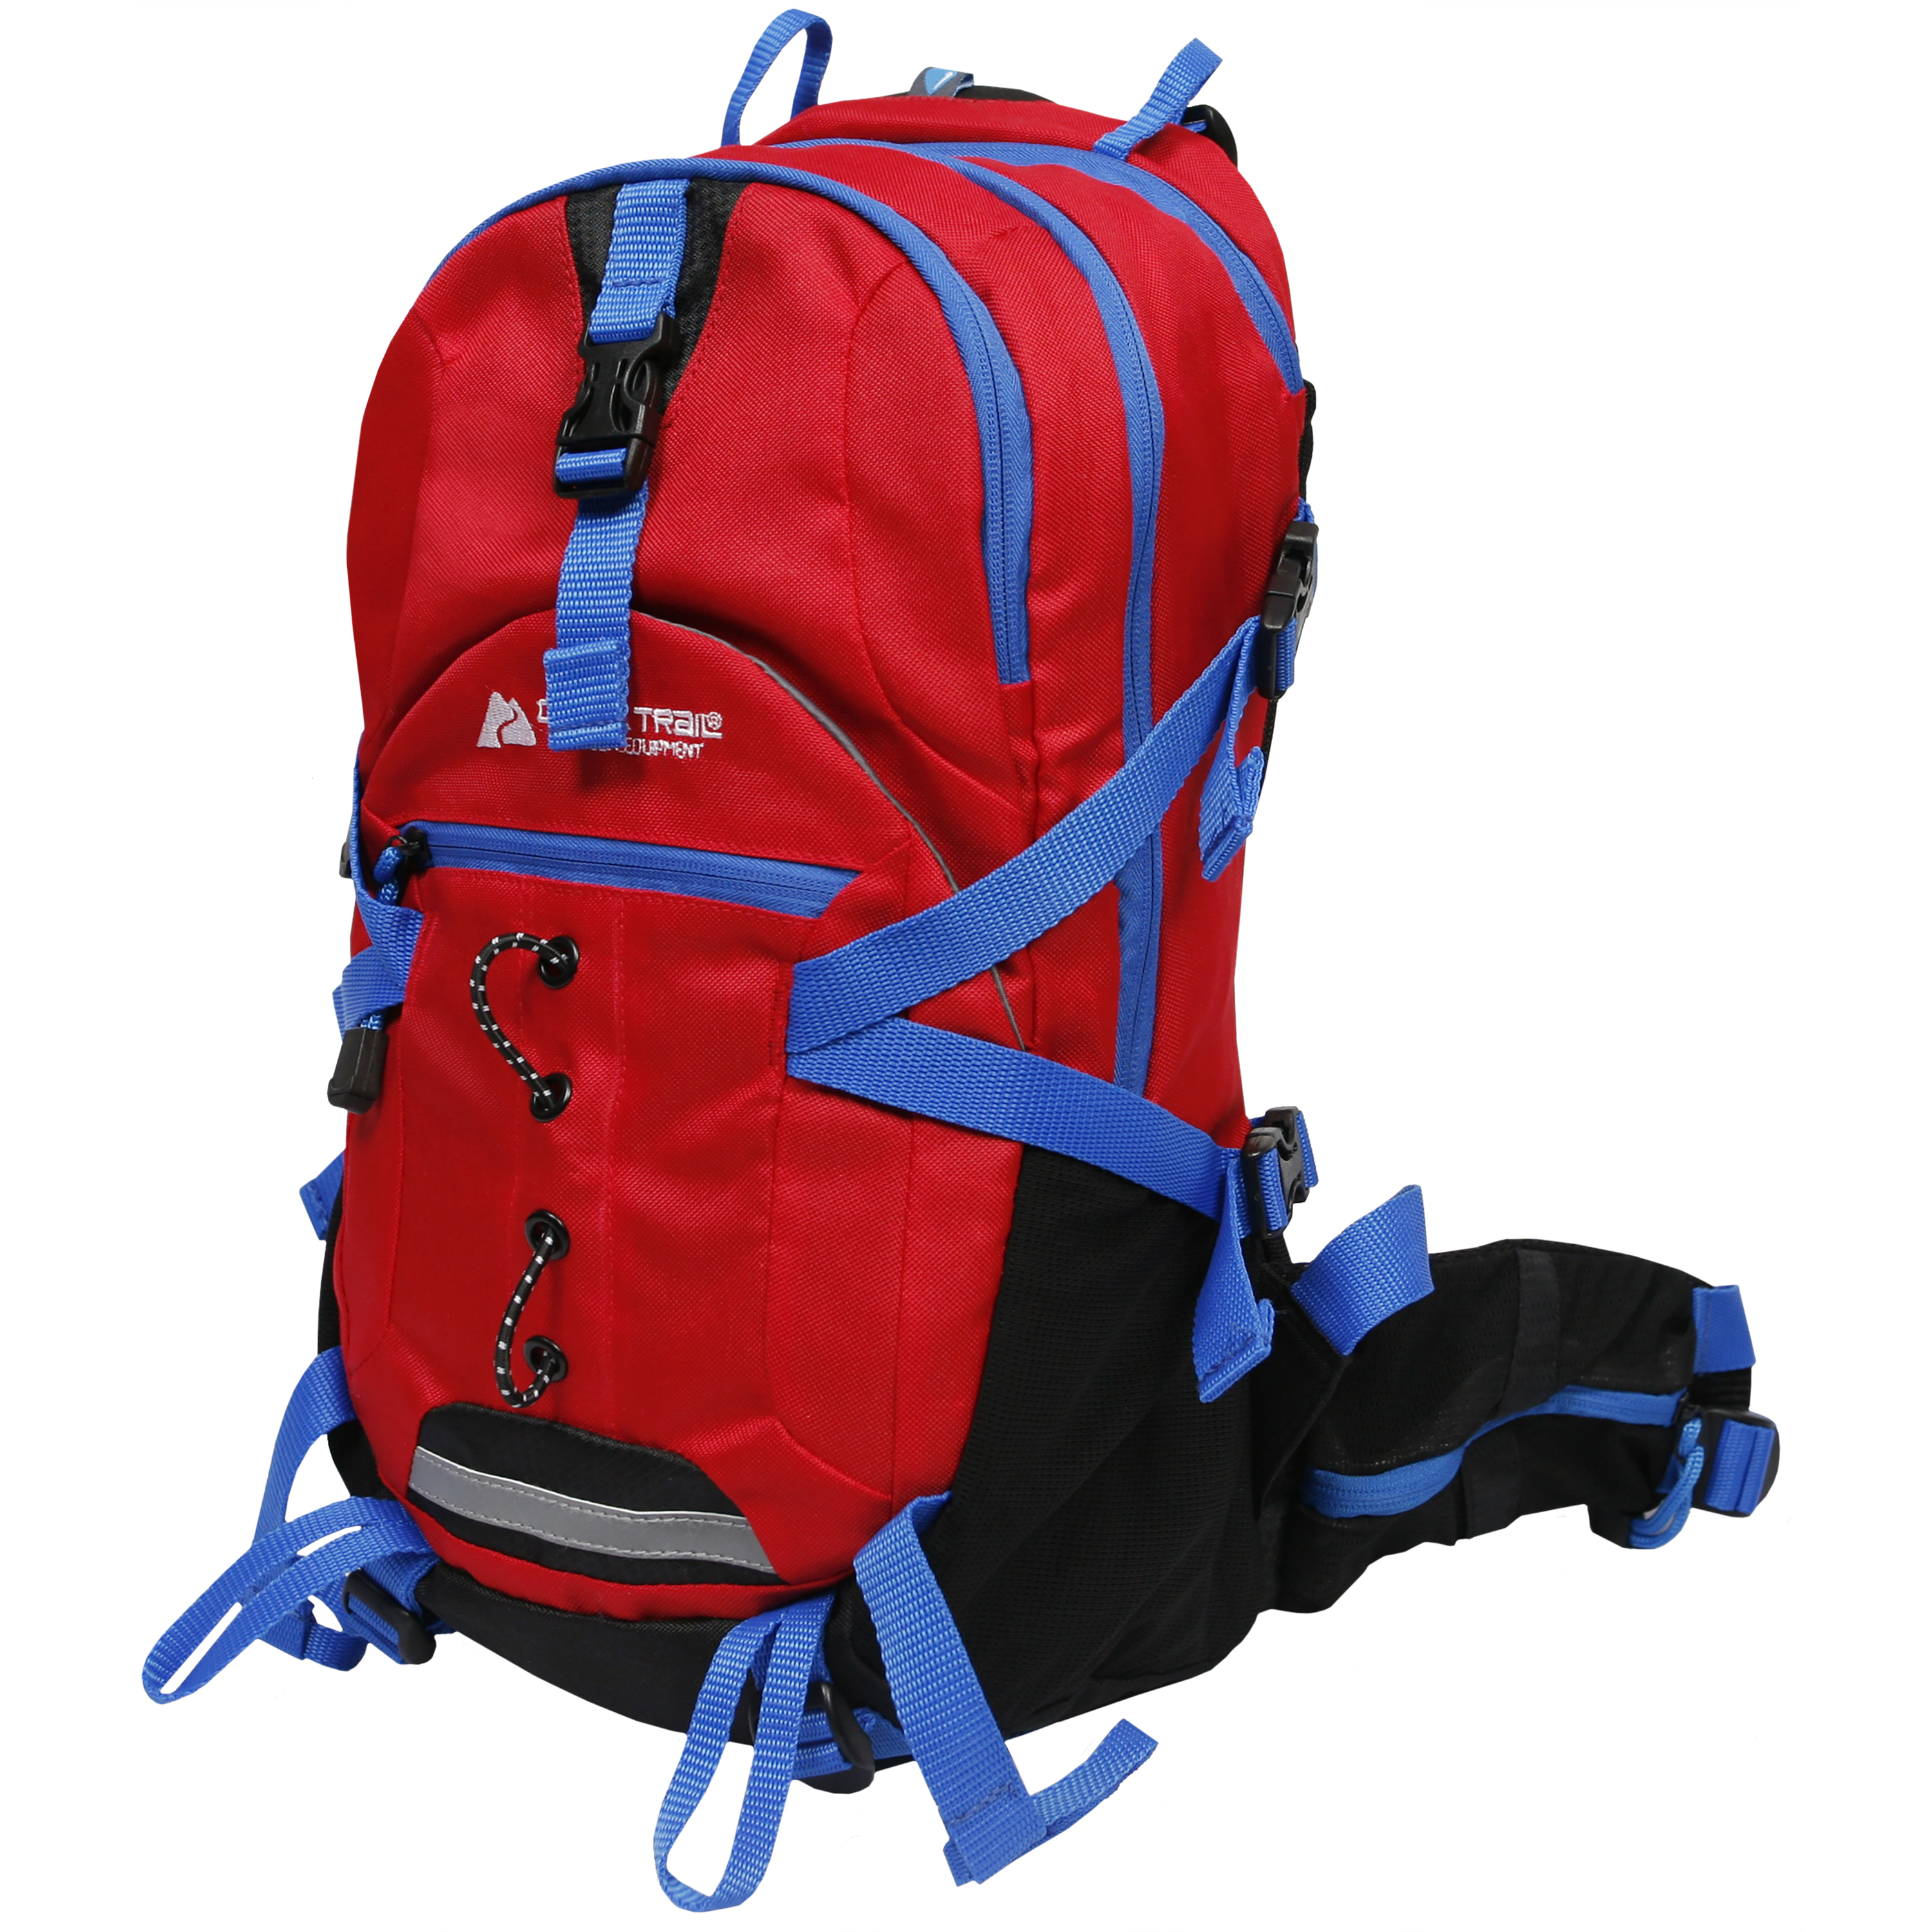 Ozark Trail 17-Liter Blanchard Springs Hydration Backpack with Hydration Reservoir, Red - image 1 of 4